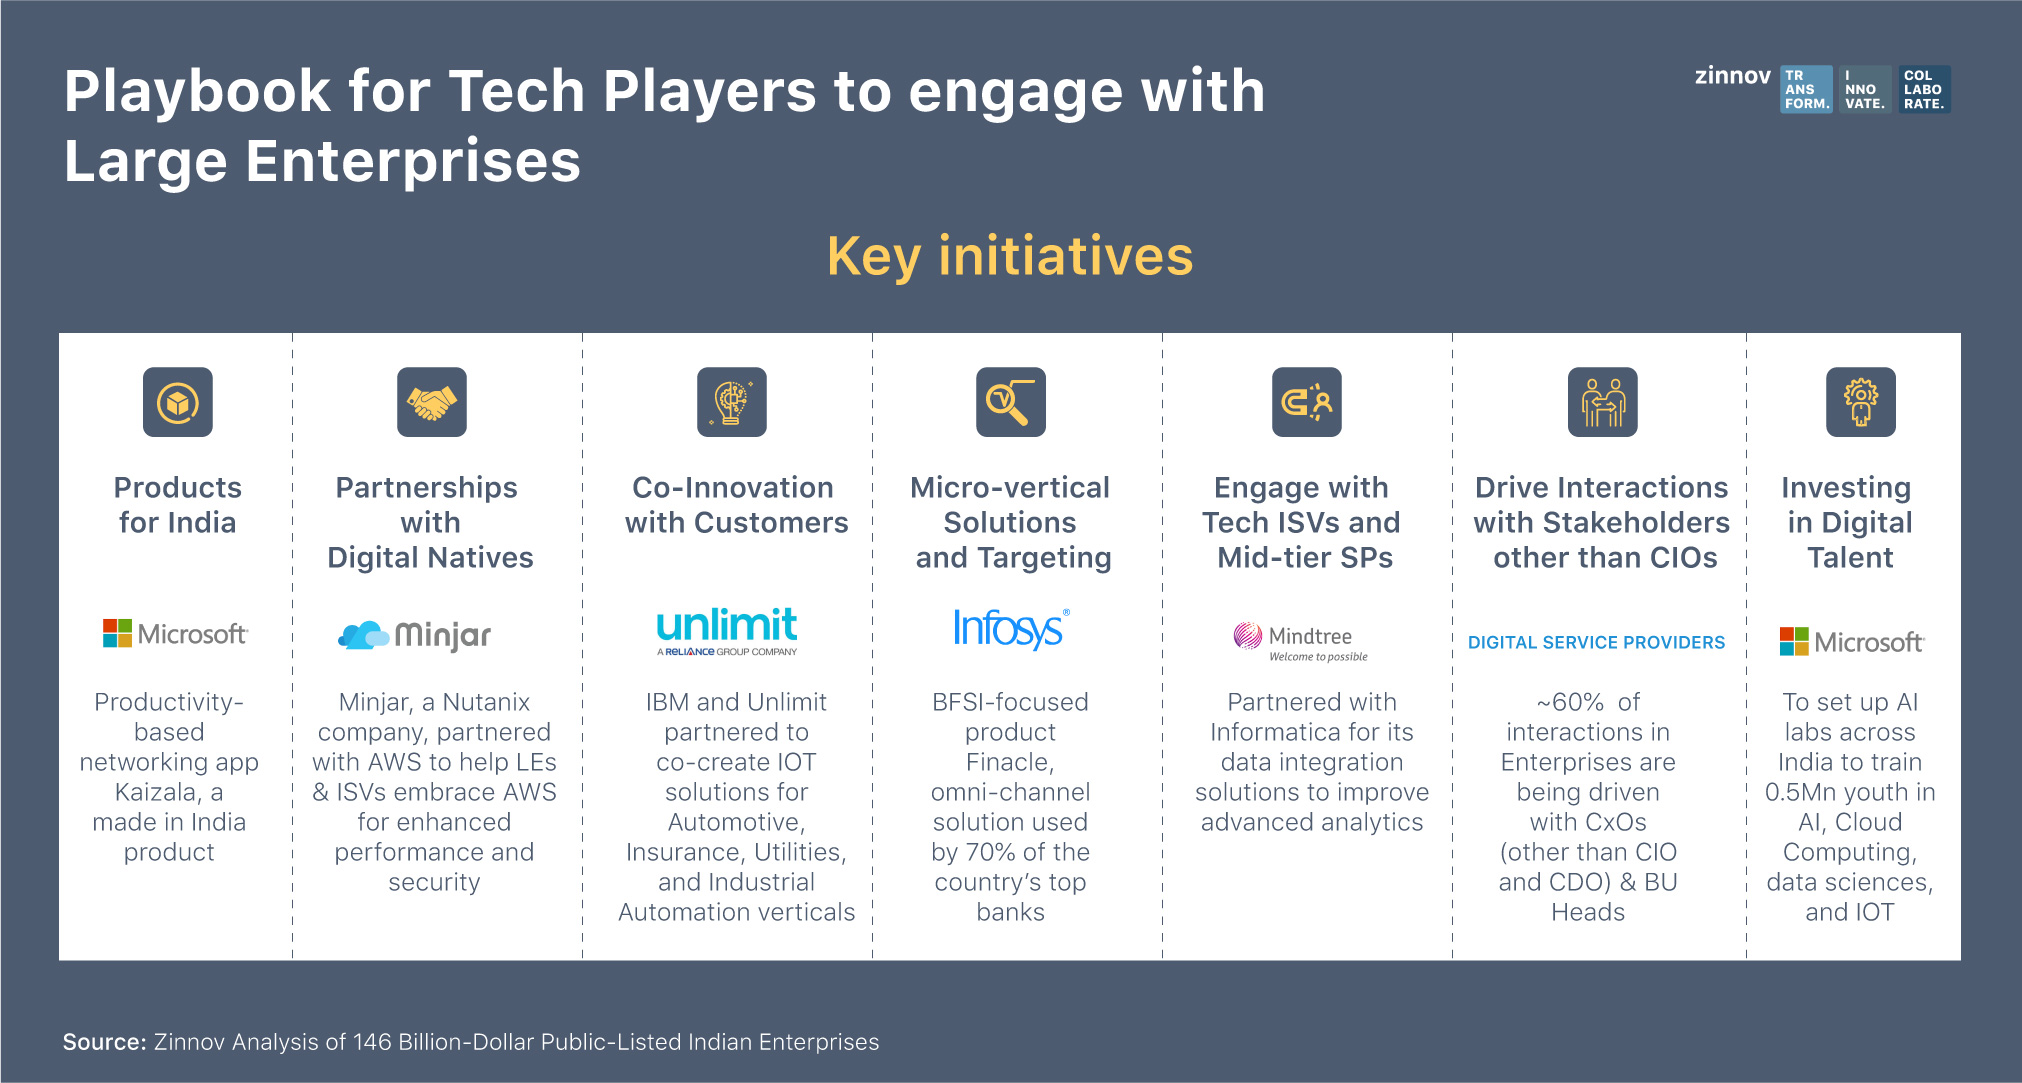 Playbook for Tech Players to engage with Large Enterprises